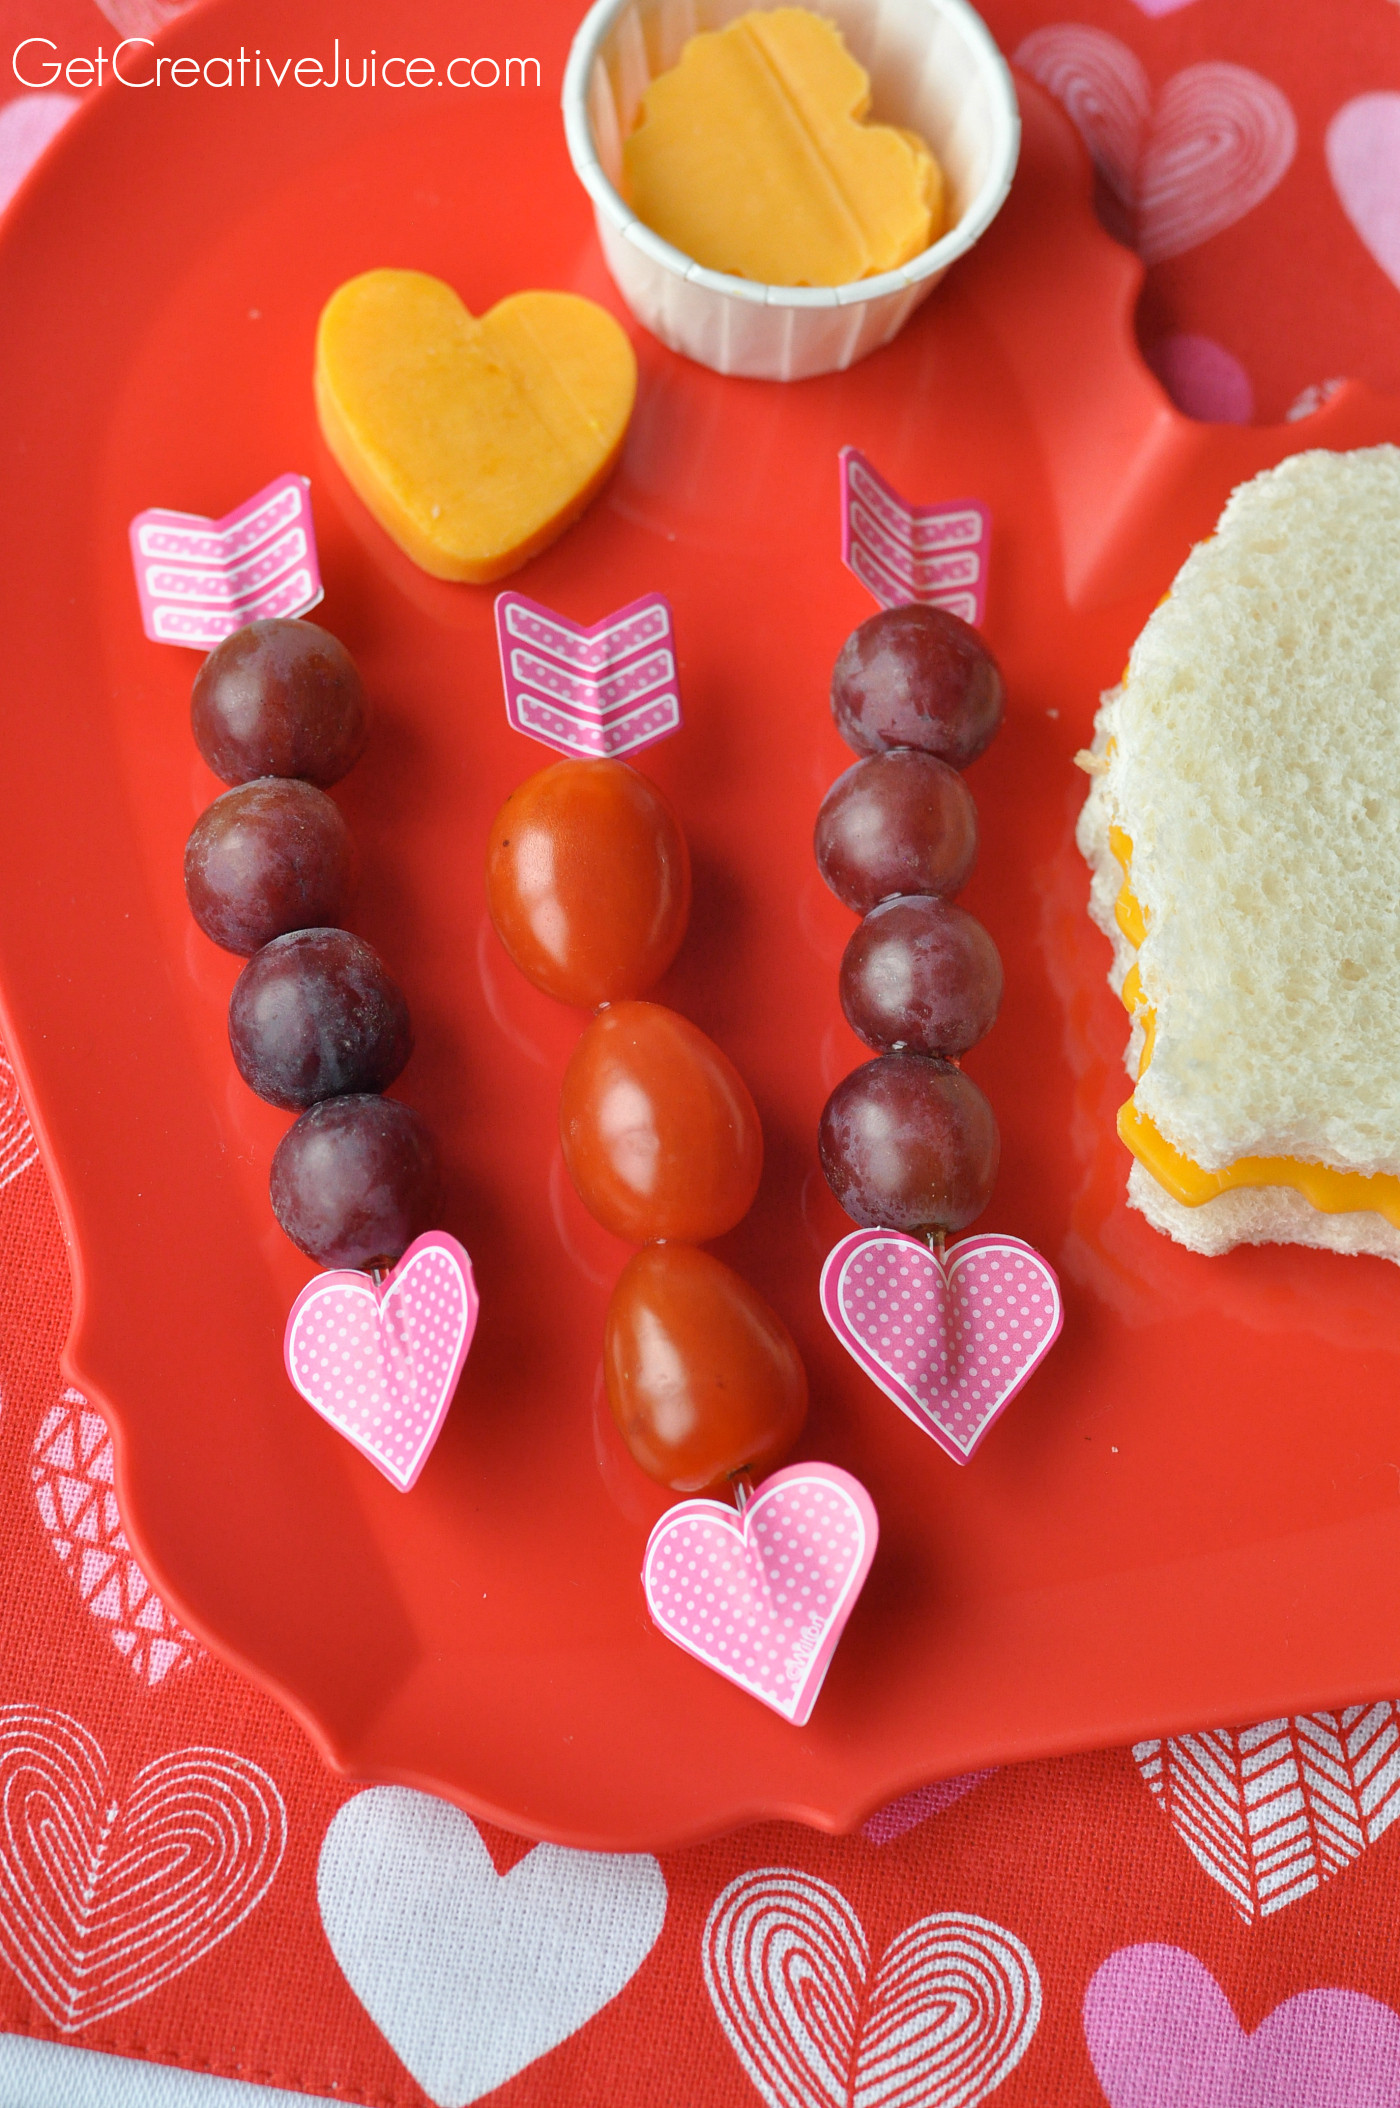 Valentines Day Snack Ideas
 Valentine Lunch Ideas and Snack Ideas Creative Juice